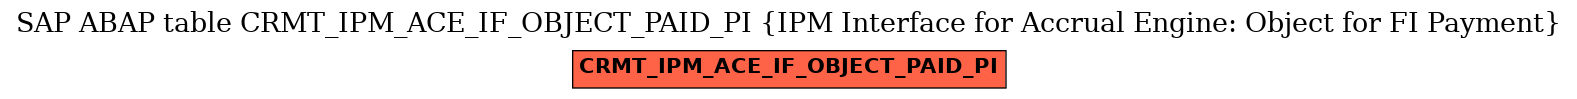 E-R Diagram for table CRMT_IPM_ACE_IF_OBJECT_PAID_PI (IPM Interface for Accrual Engine: Object for FI Payment)